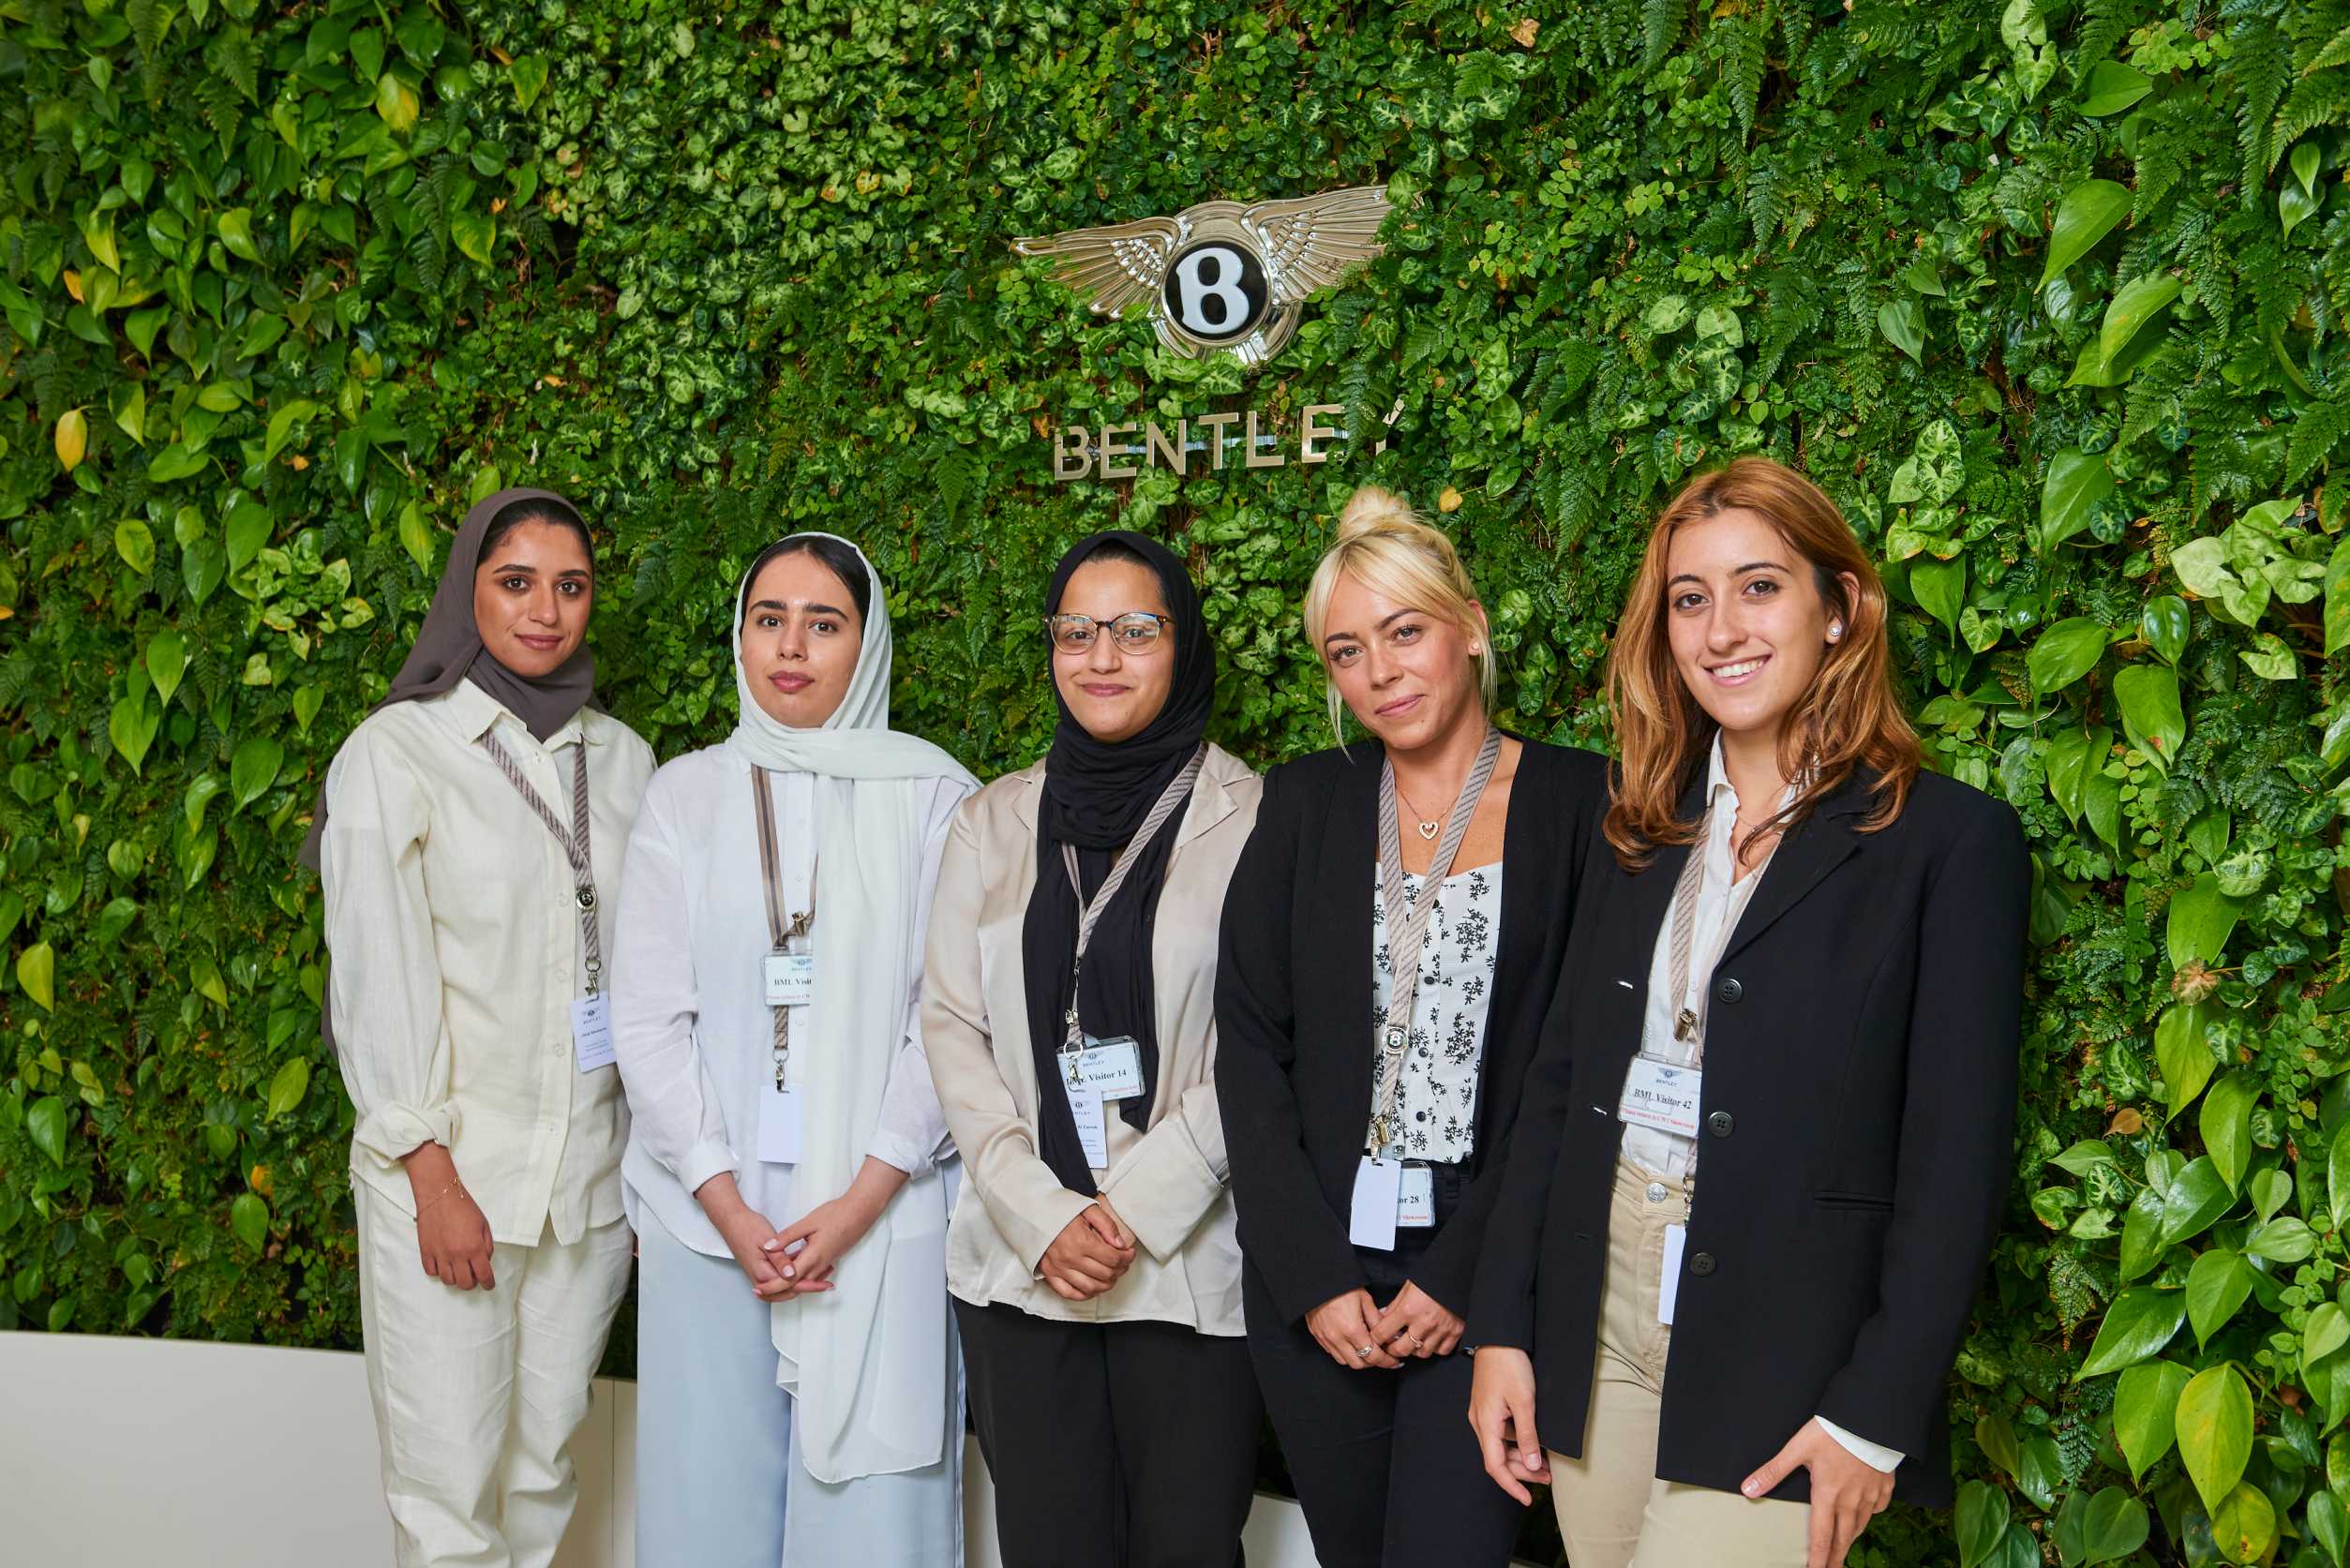 Bentley Successfully Completes First Phase Of Female Mentoring Programme